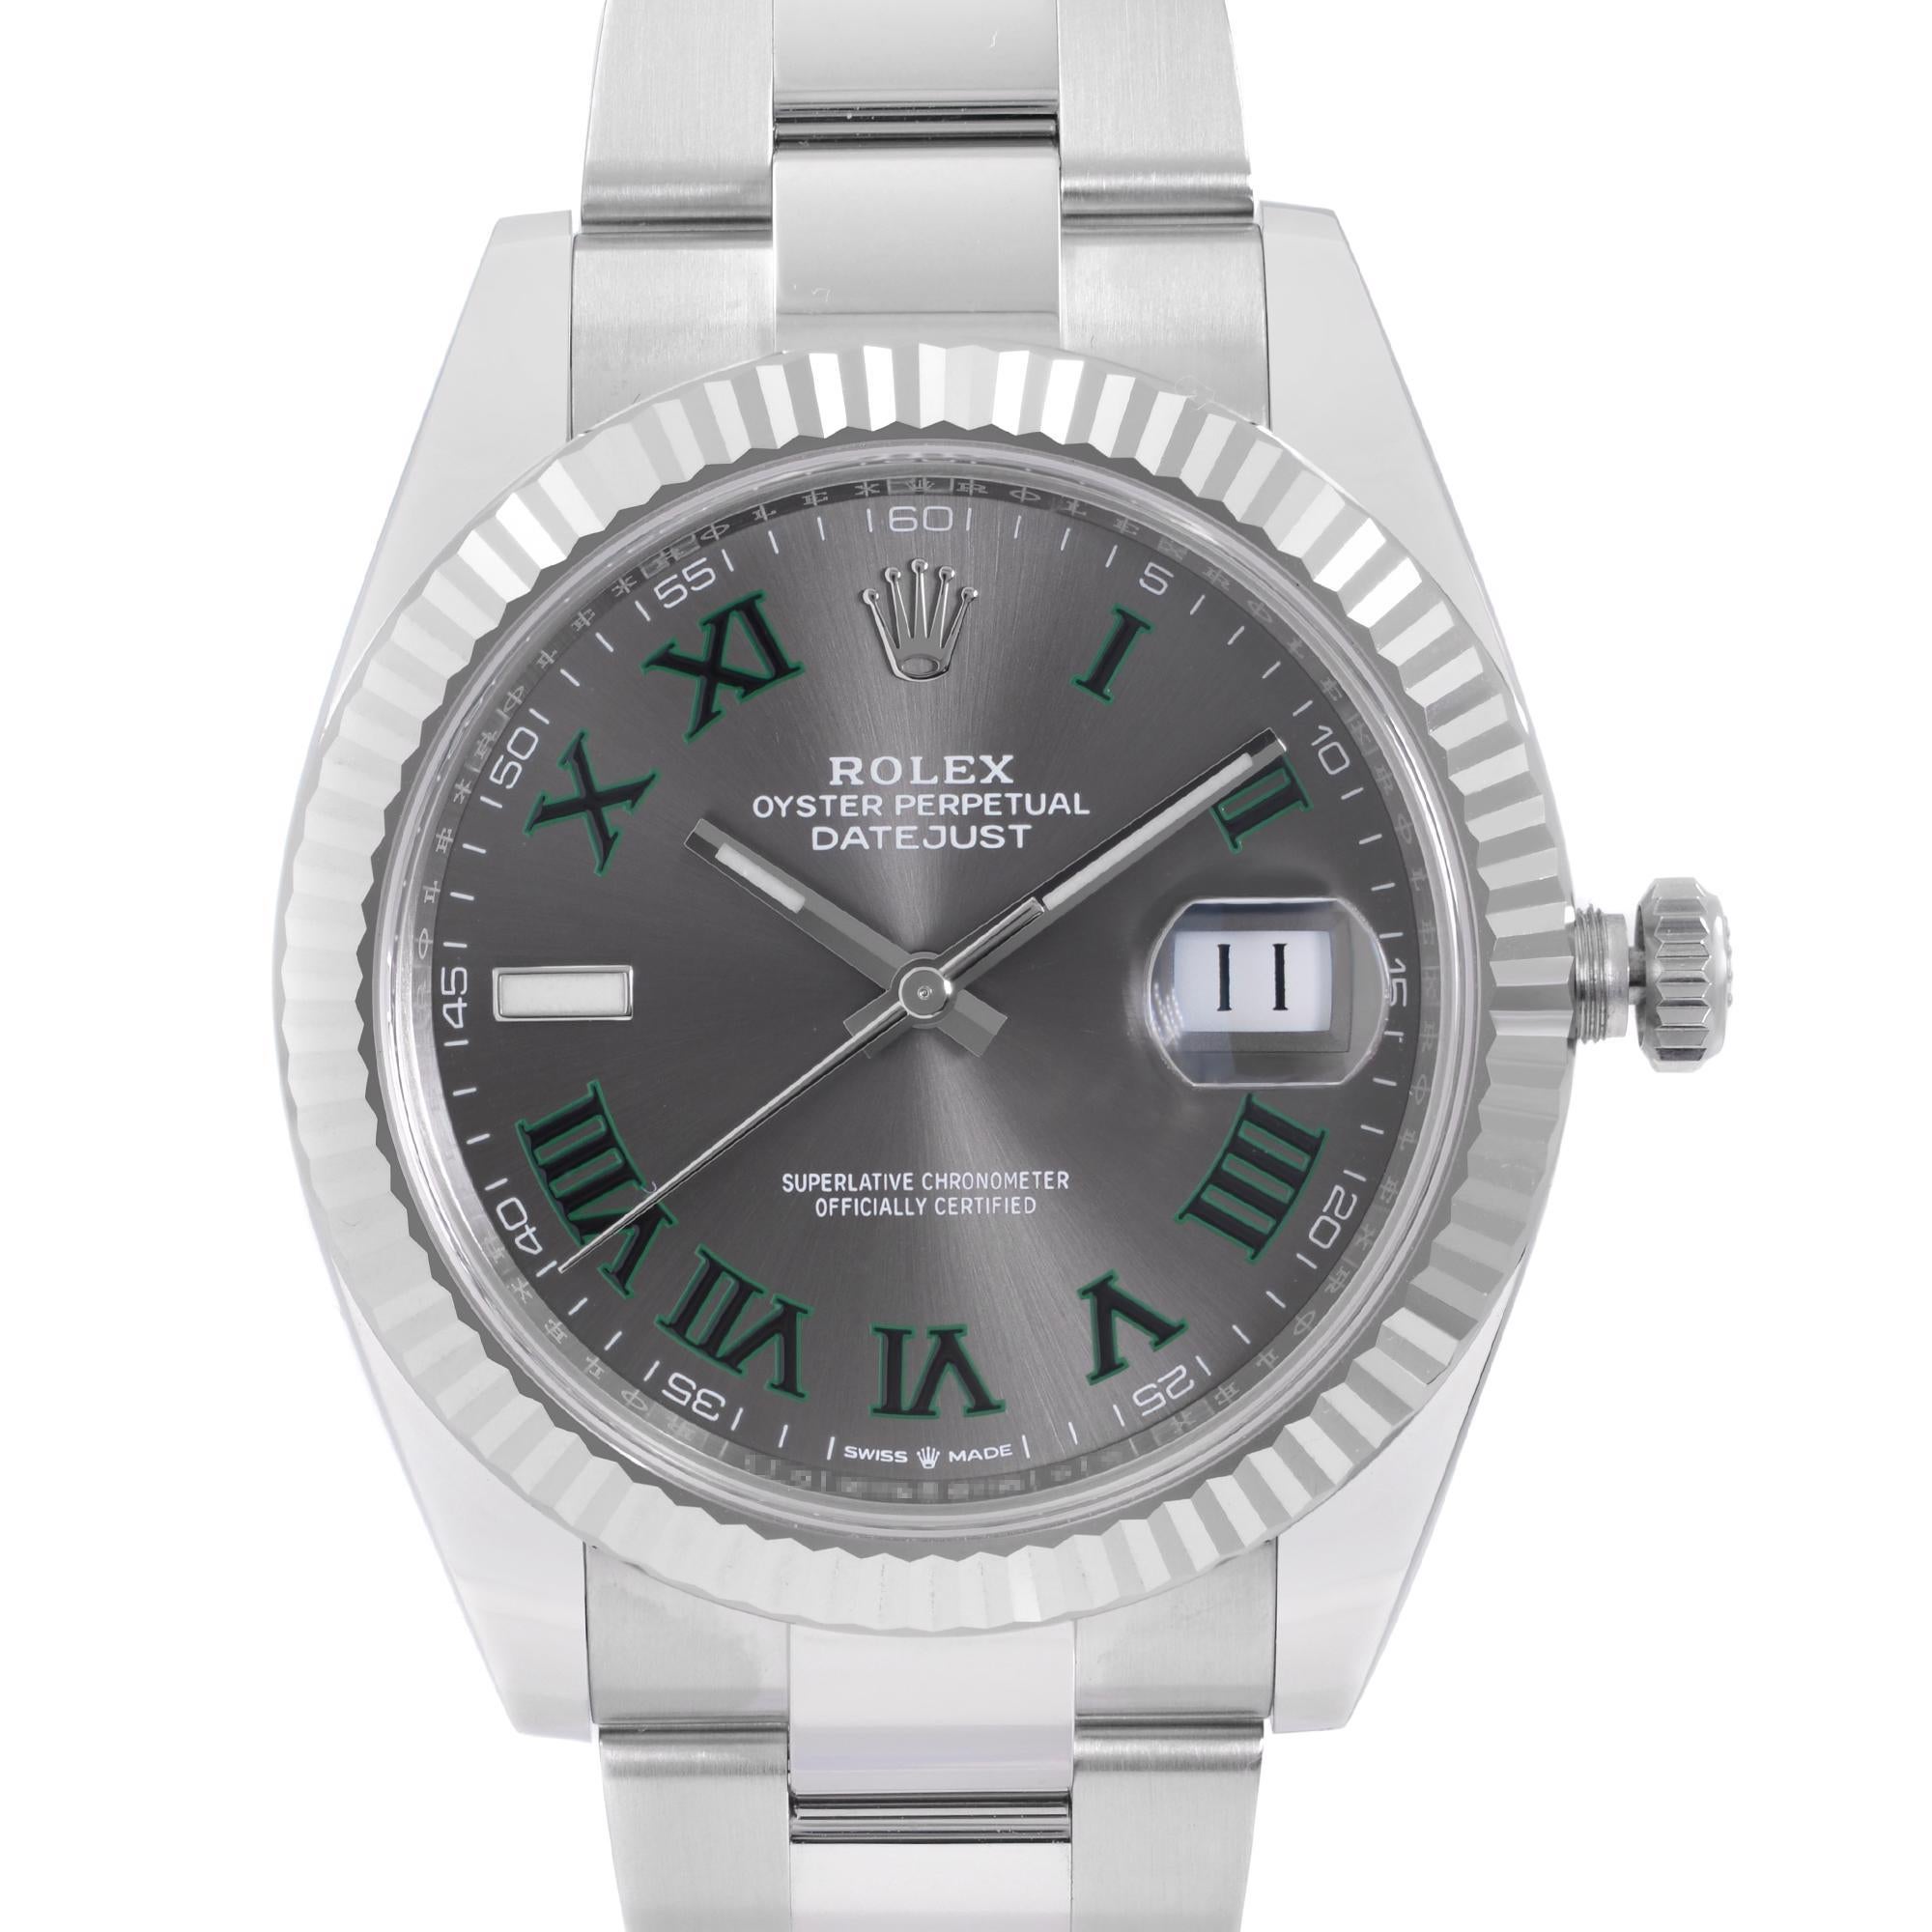 Display Model 2021 Card Rolex Datejust 41 Steel 18k White Gold Wimbledon Dial Automatic Men Watch 126334. This Beautiful Timepiece Is Powered by a Mechanical (Automatic) Movement and Features: Stainless Steel Case With a Stainless Steel Oyster